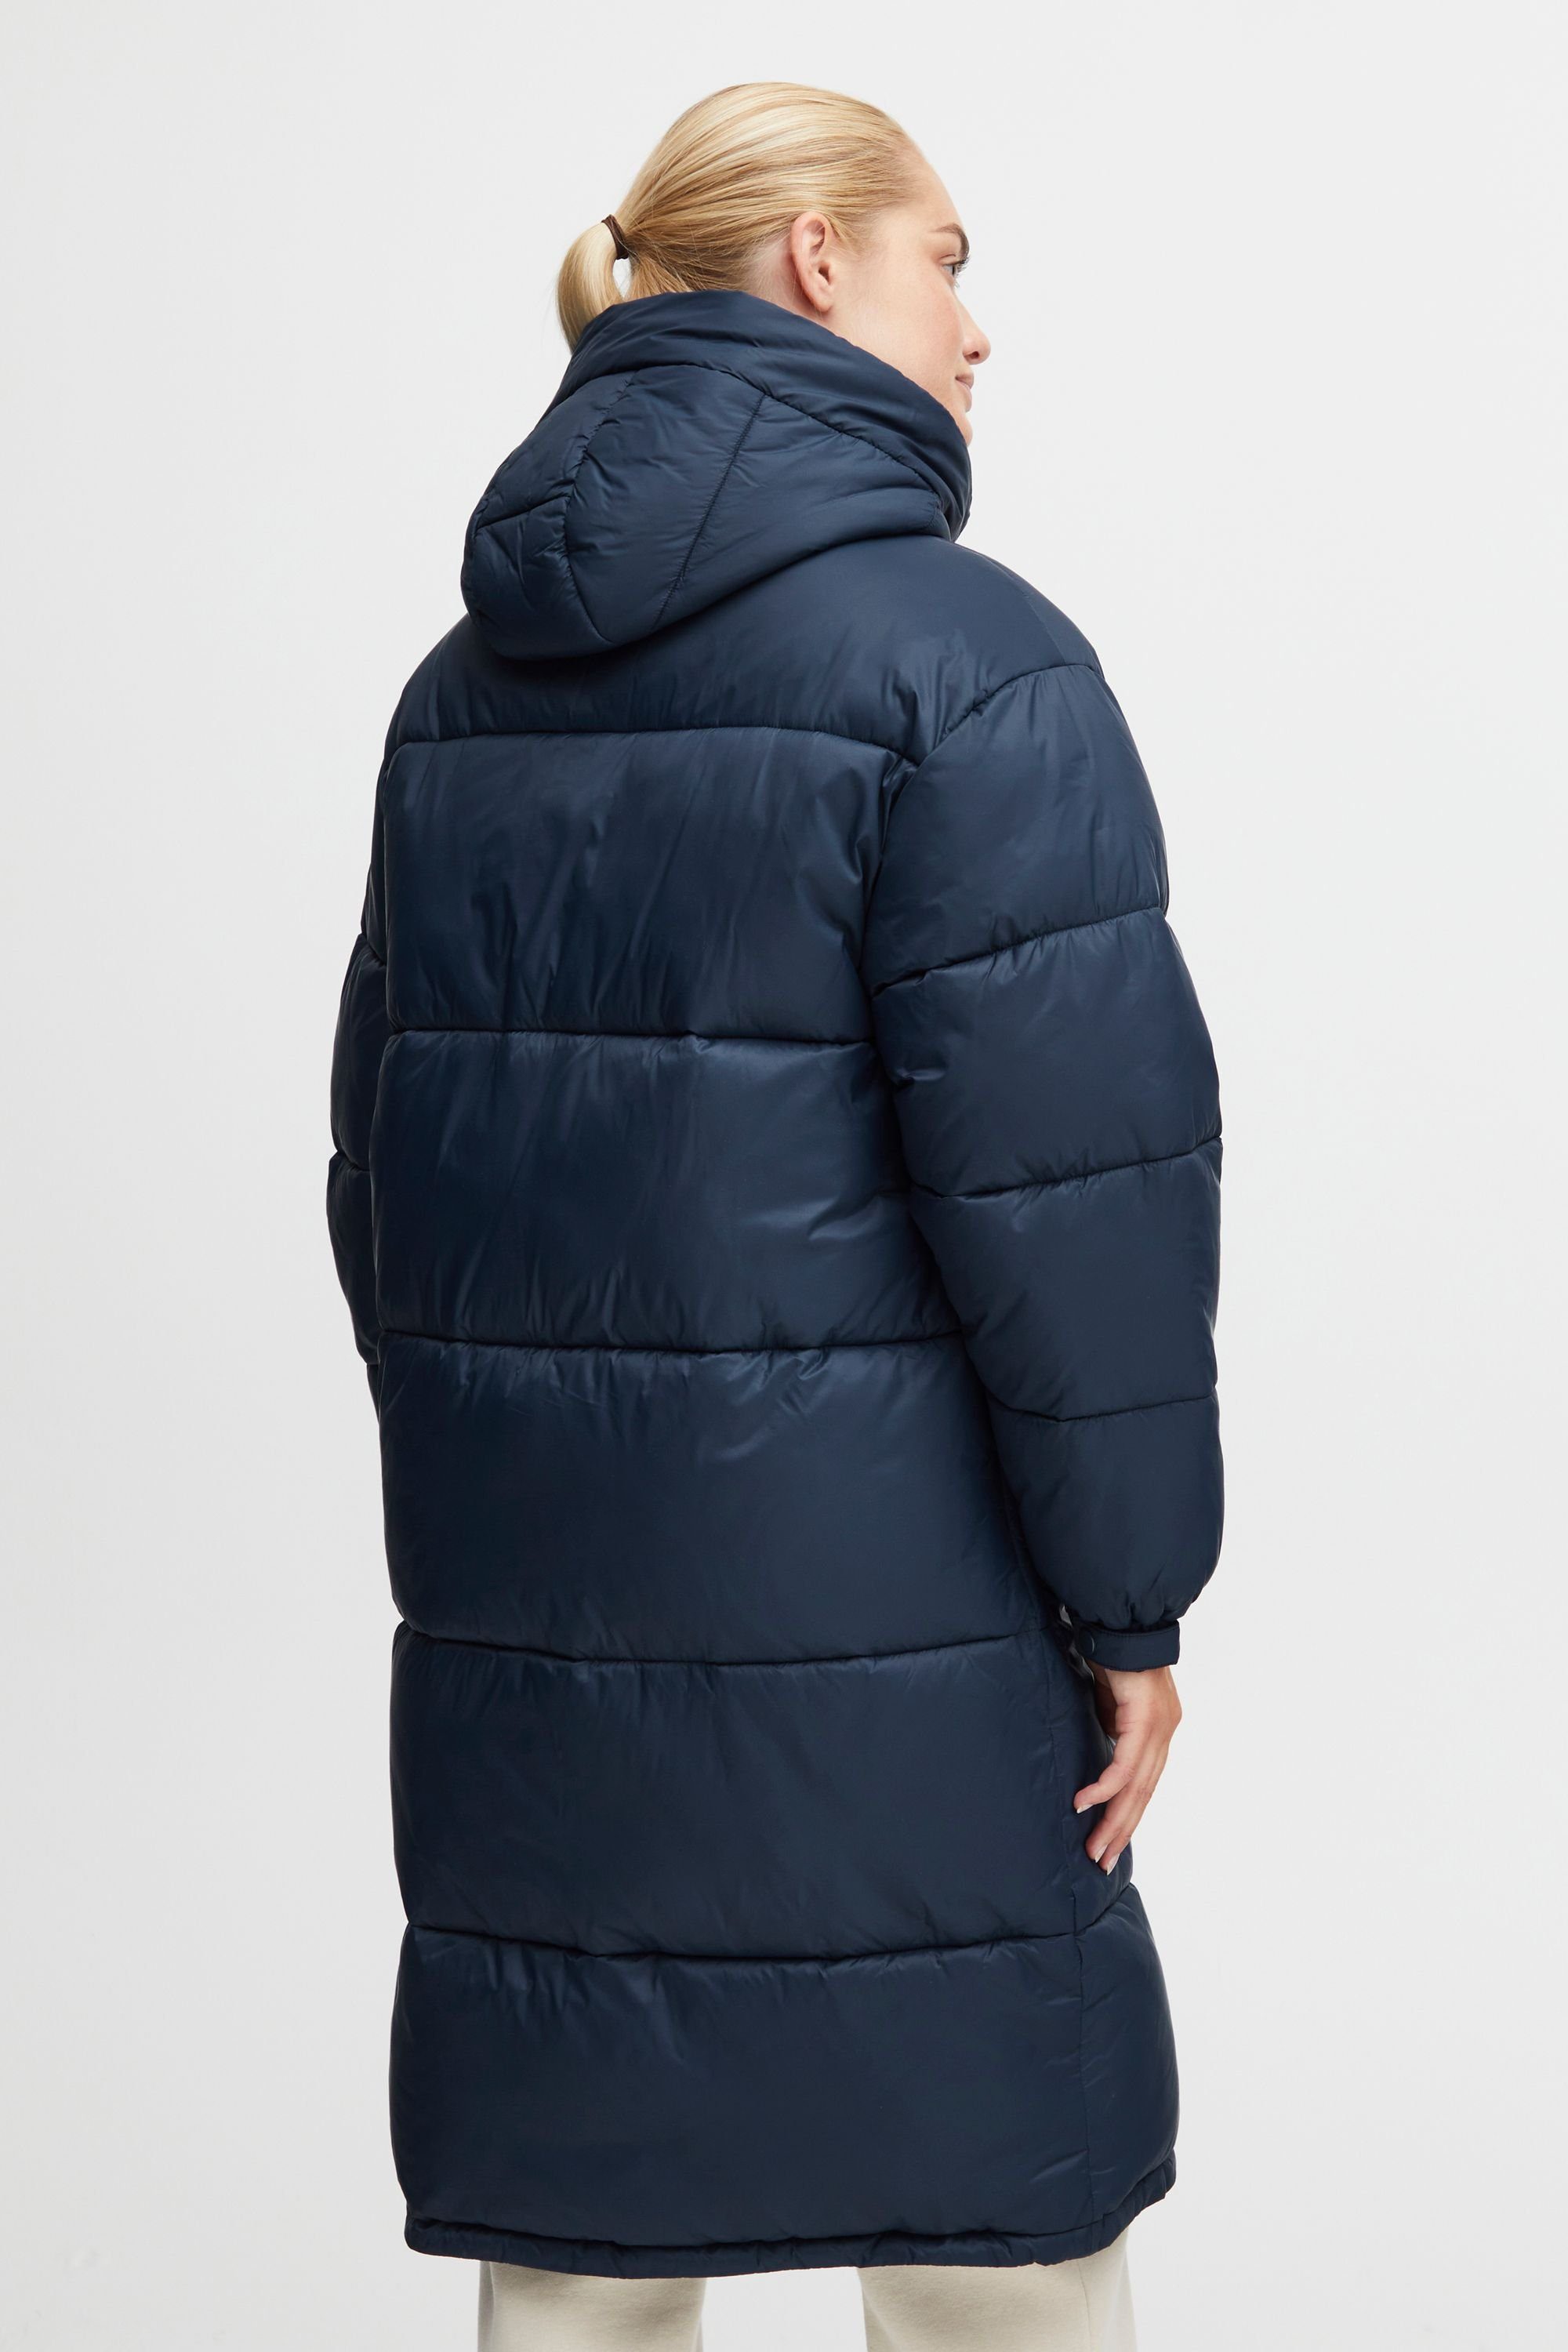 OXMO Parka OXJolyn Eclipse Total (194010)